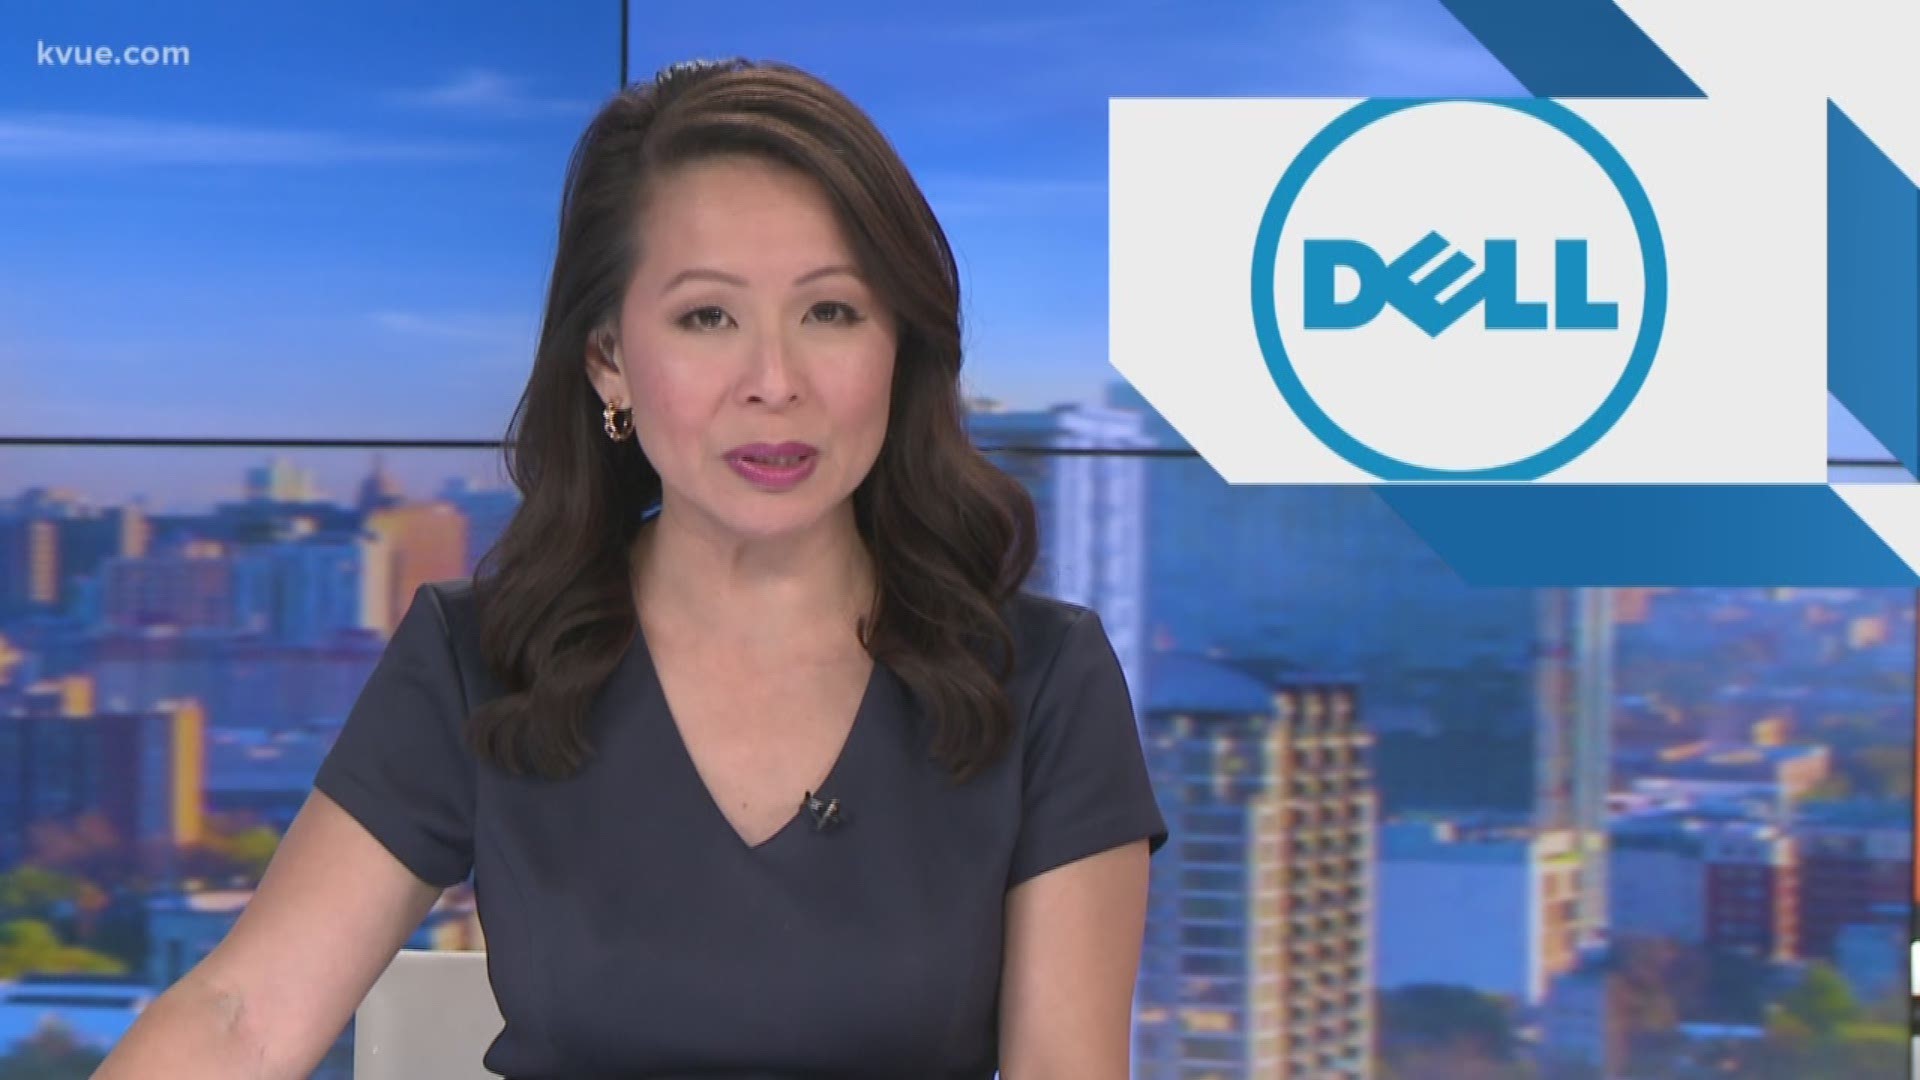 Dell goes public on trading markets